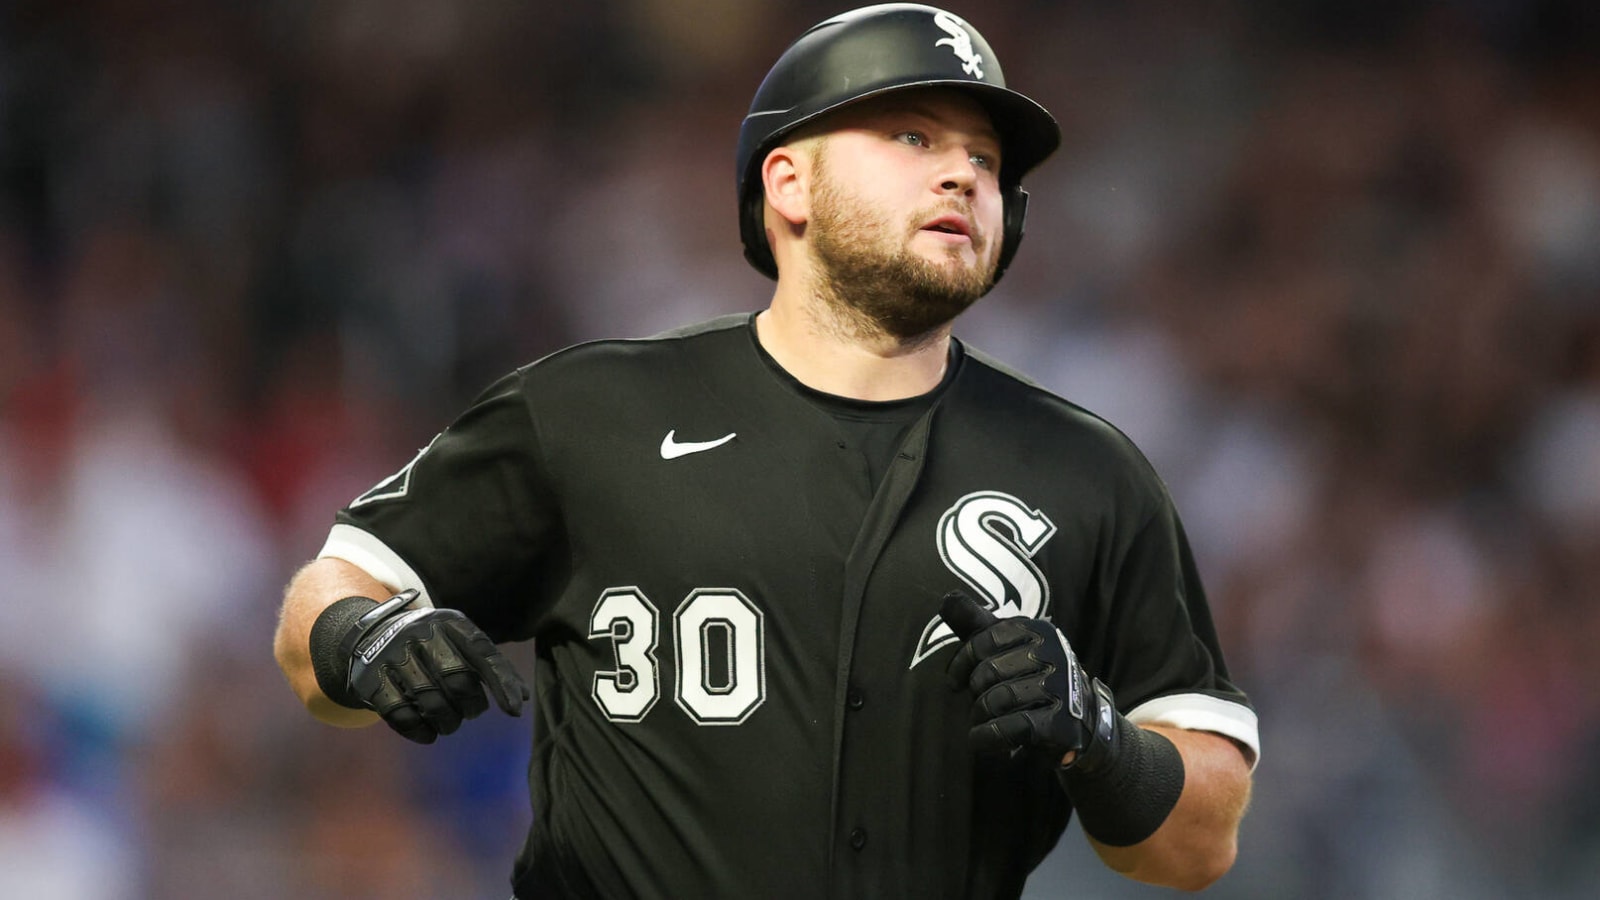 Marlins acquire slugger from White Sox